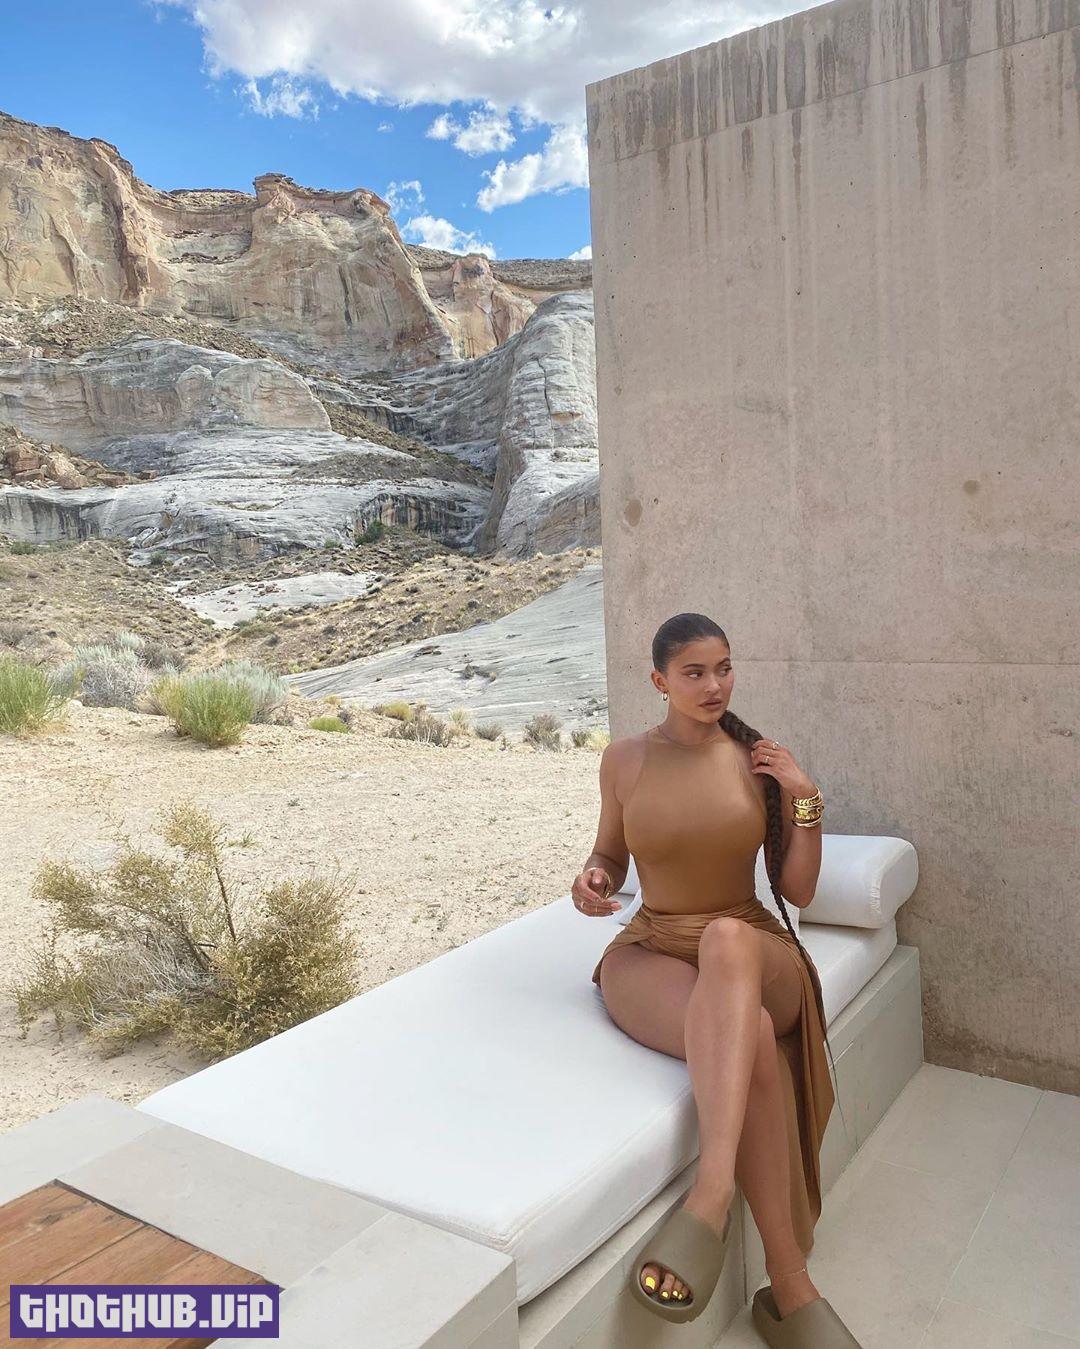 1702477624 30 Kylie Jenner In A Dress That Highlights Her Tan 13